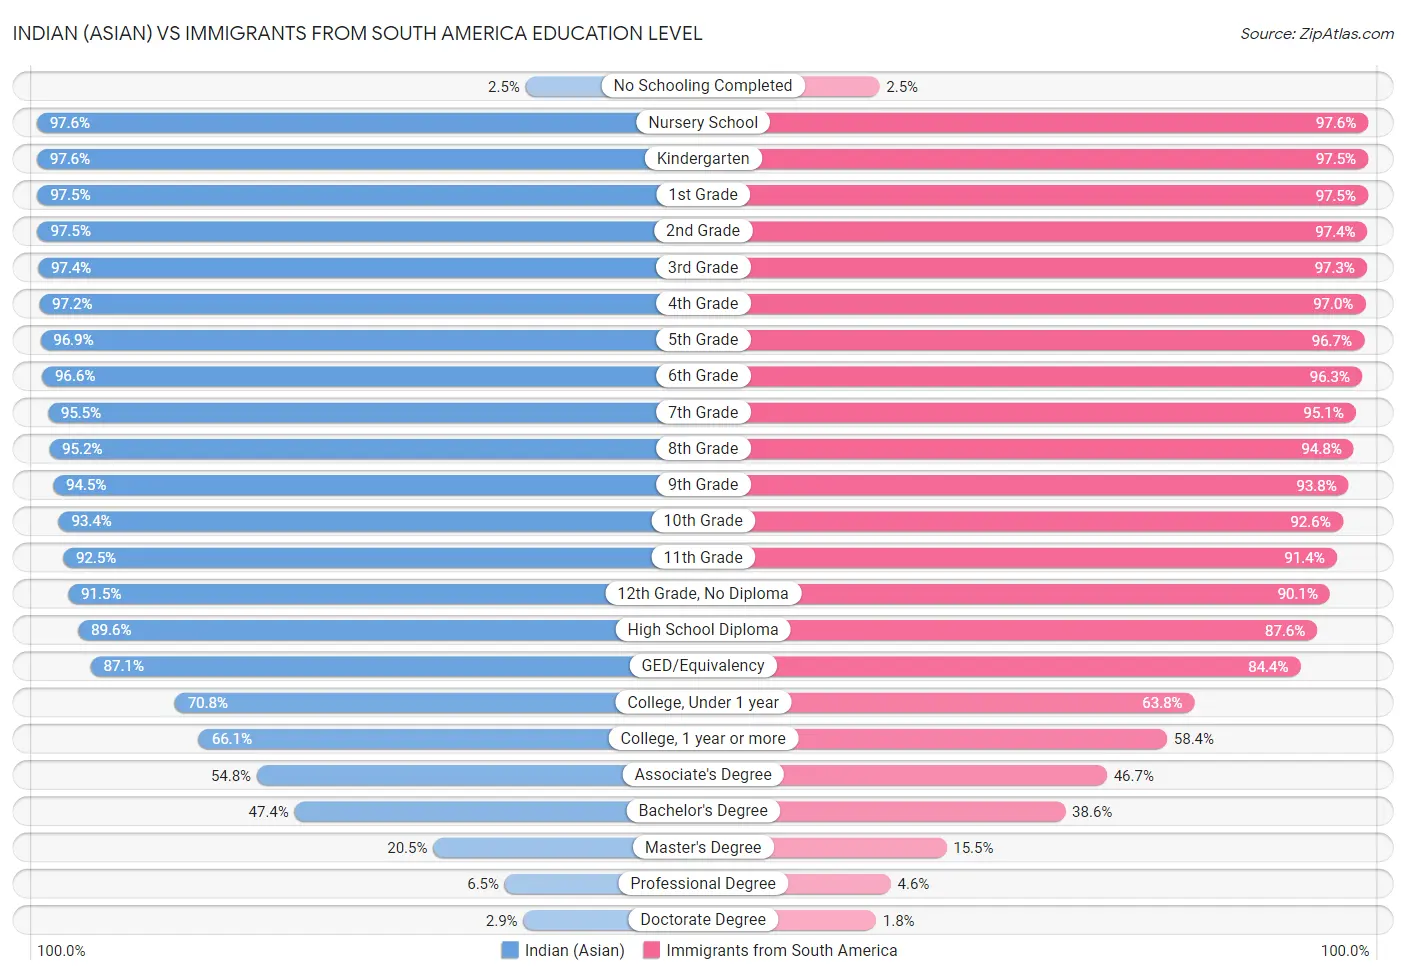 Indian (Asian) vs Immigrants from South America Education Level